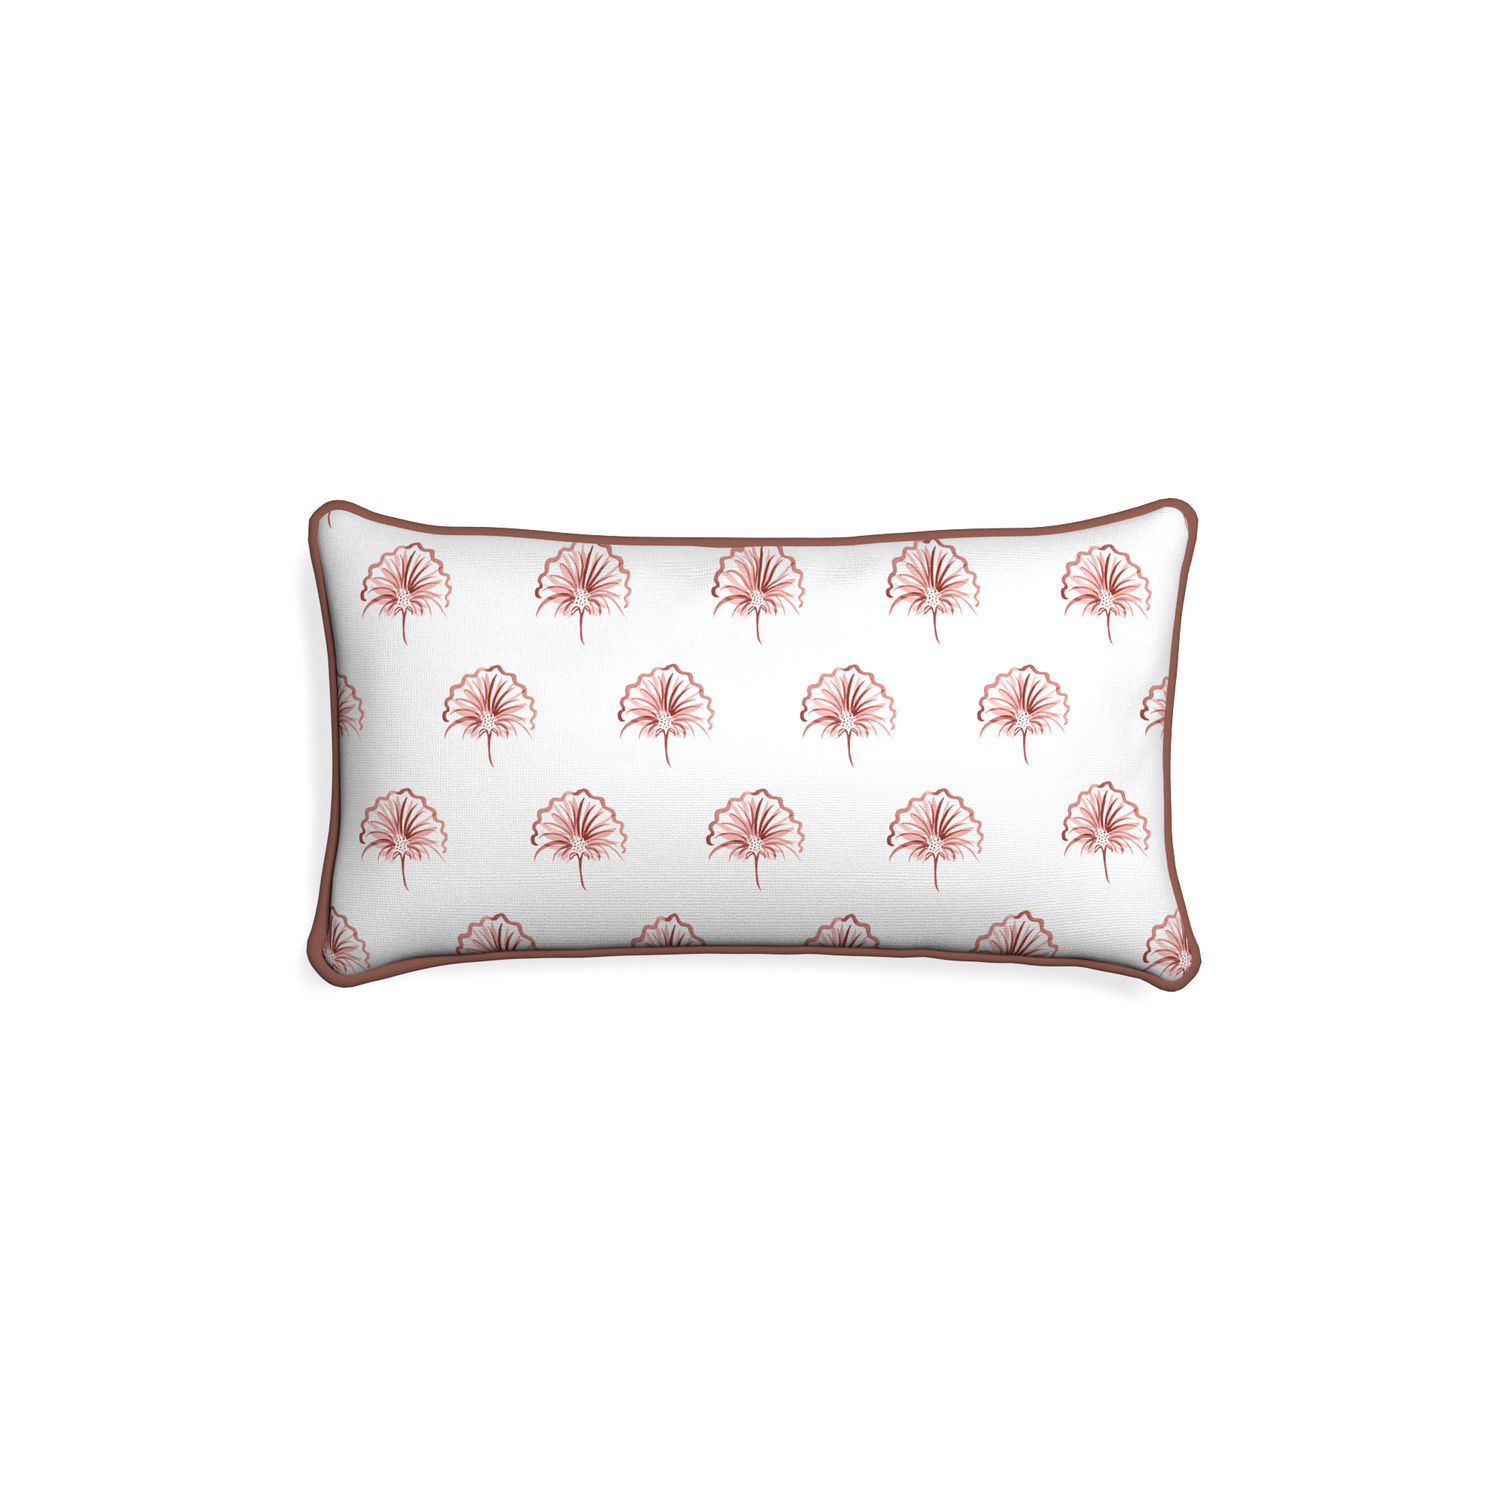 Petite-lumbar penelope rose custom floral pinkpillow with w piping on white background